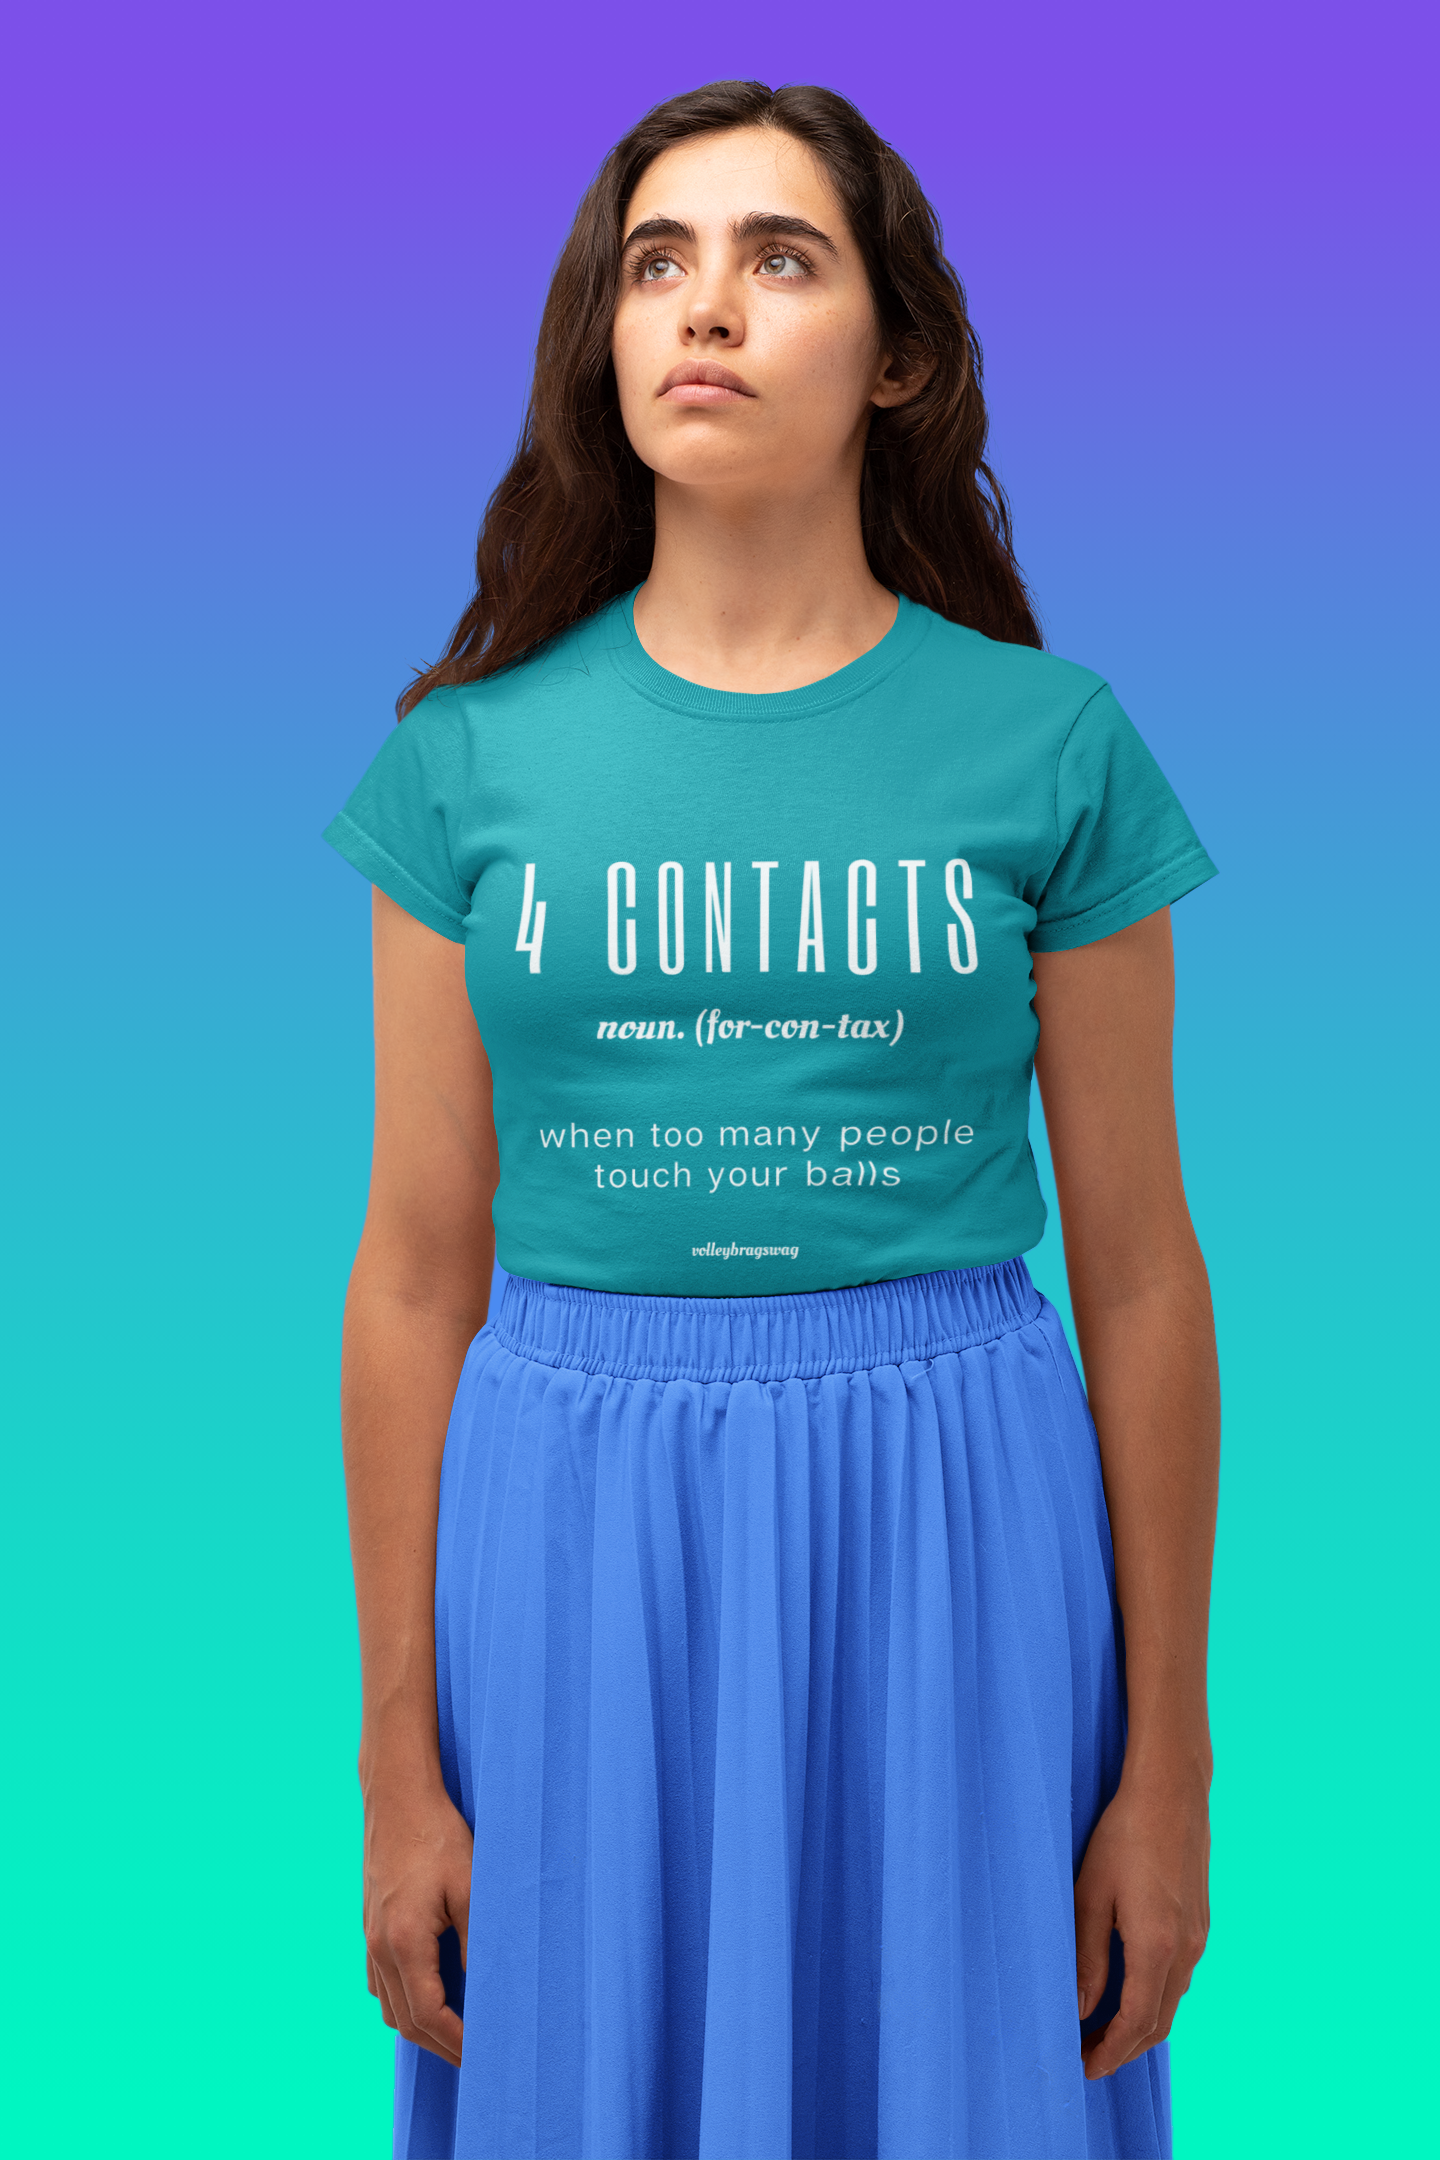 4 Contacts (noun) When Too Many People Touch Your Balls volleyball shirt. April Chapple, Launches a Hilarious Volleyball T-shirt Line With Fun Tongue-in-Cheek Designs sure to make players laugh.